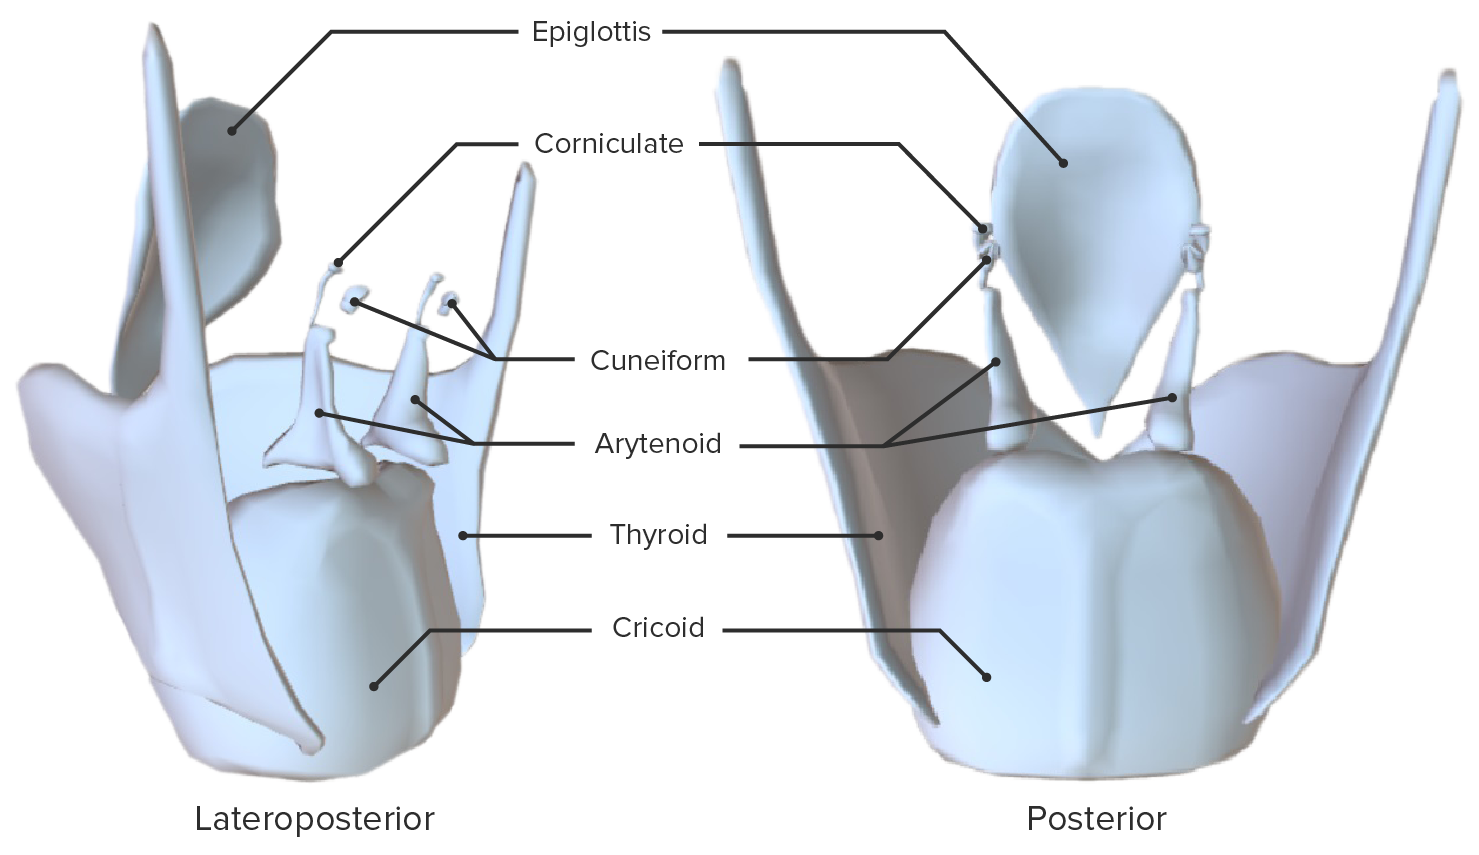 Lateroposterior and posterior views of the isolated cartilages of the larynx